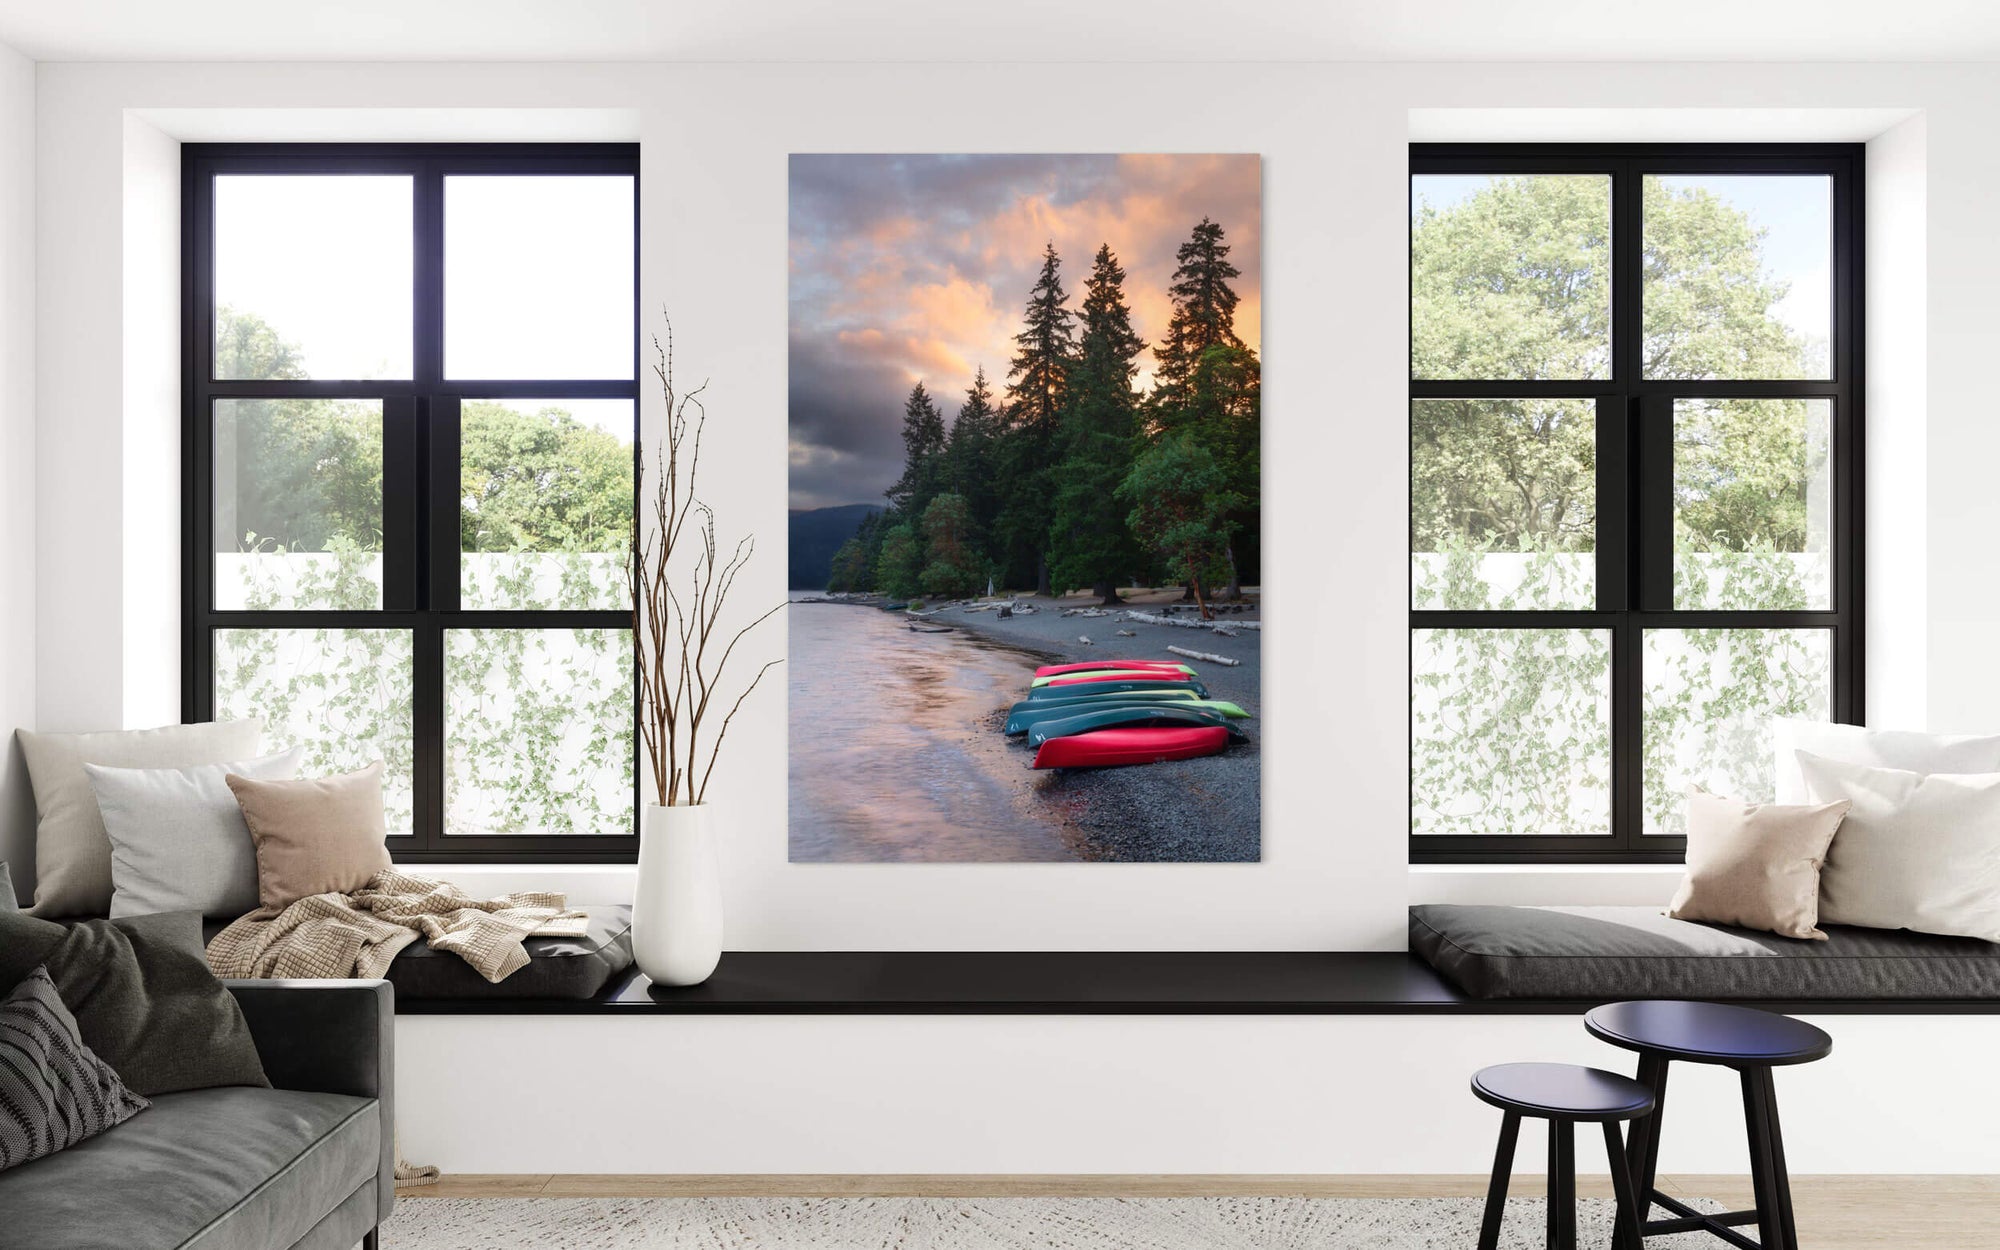 A Crescent Lake picture from Washington hangs in a living room.